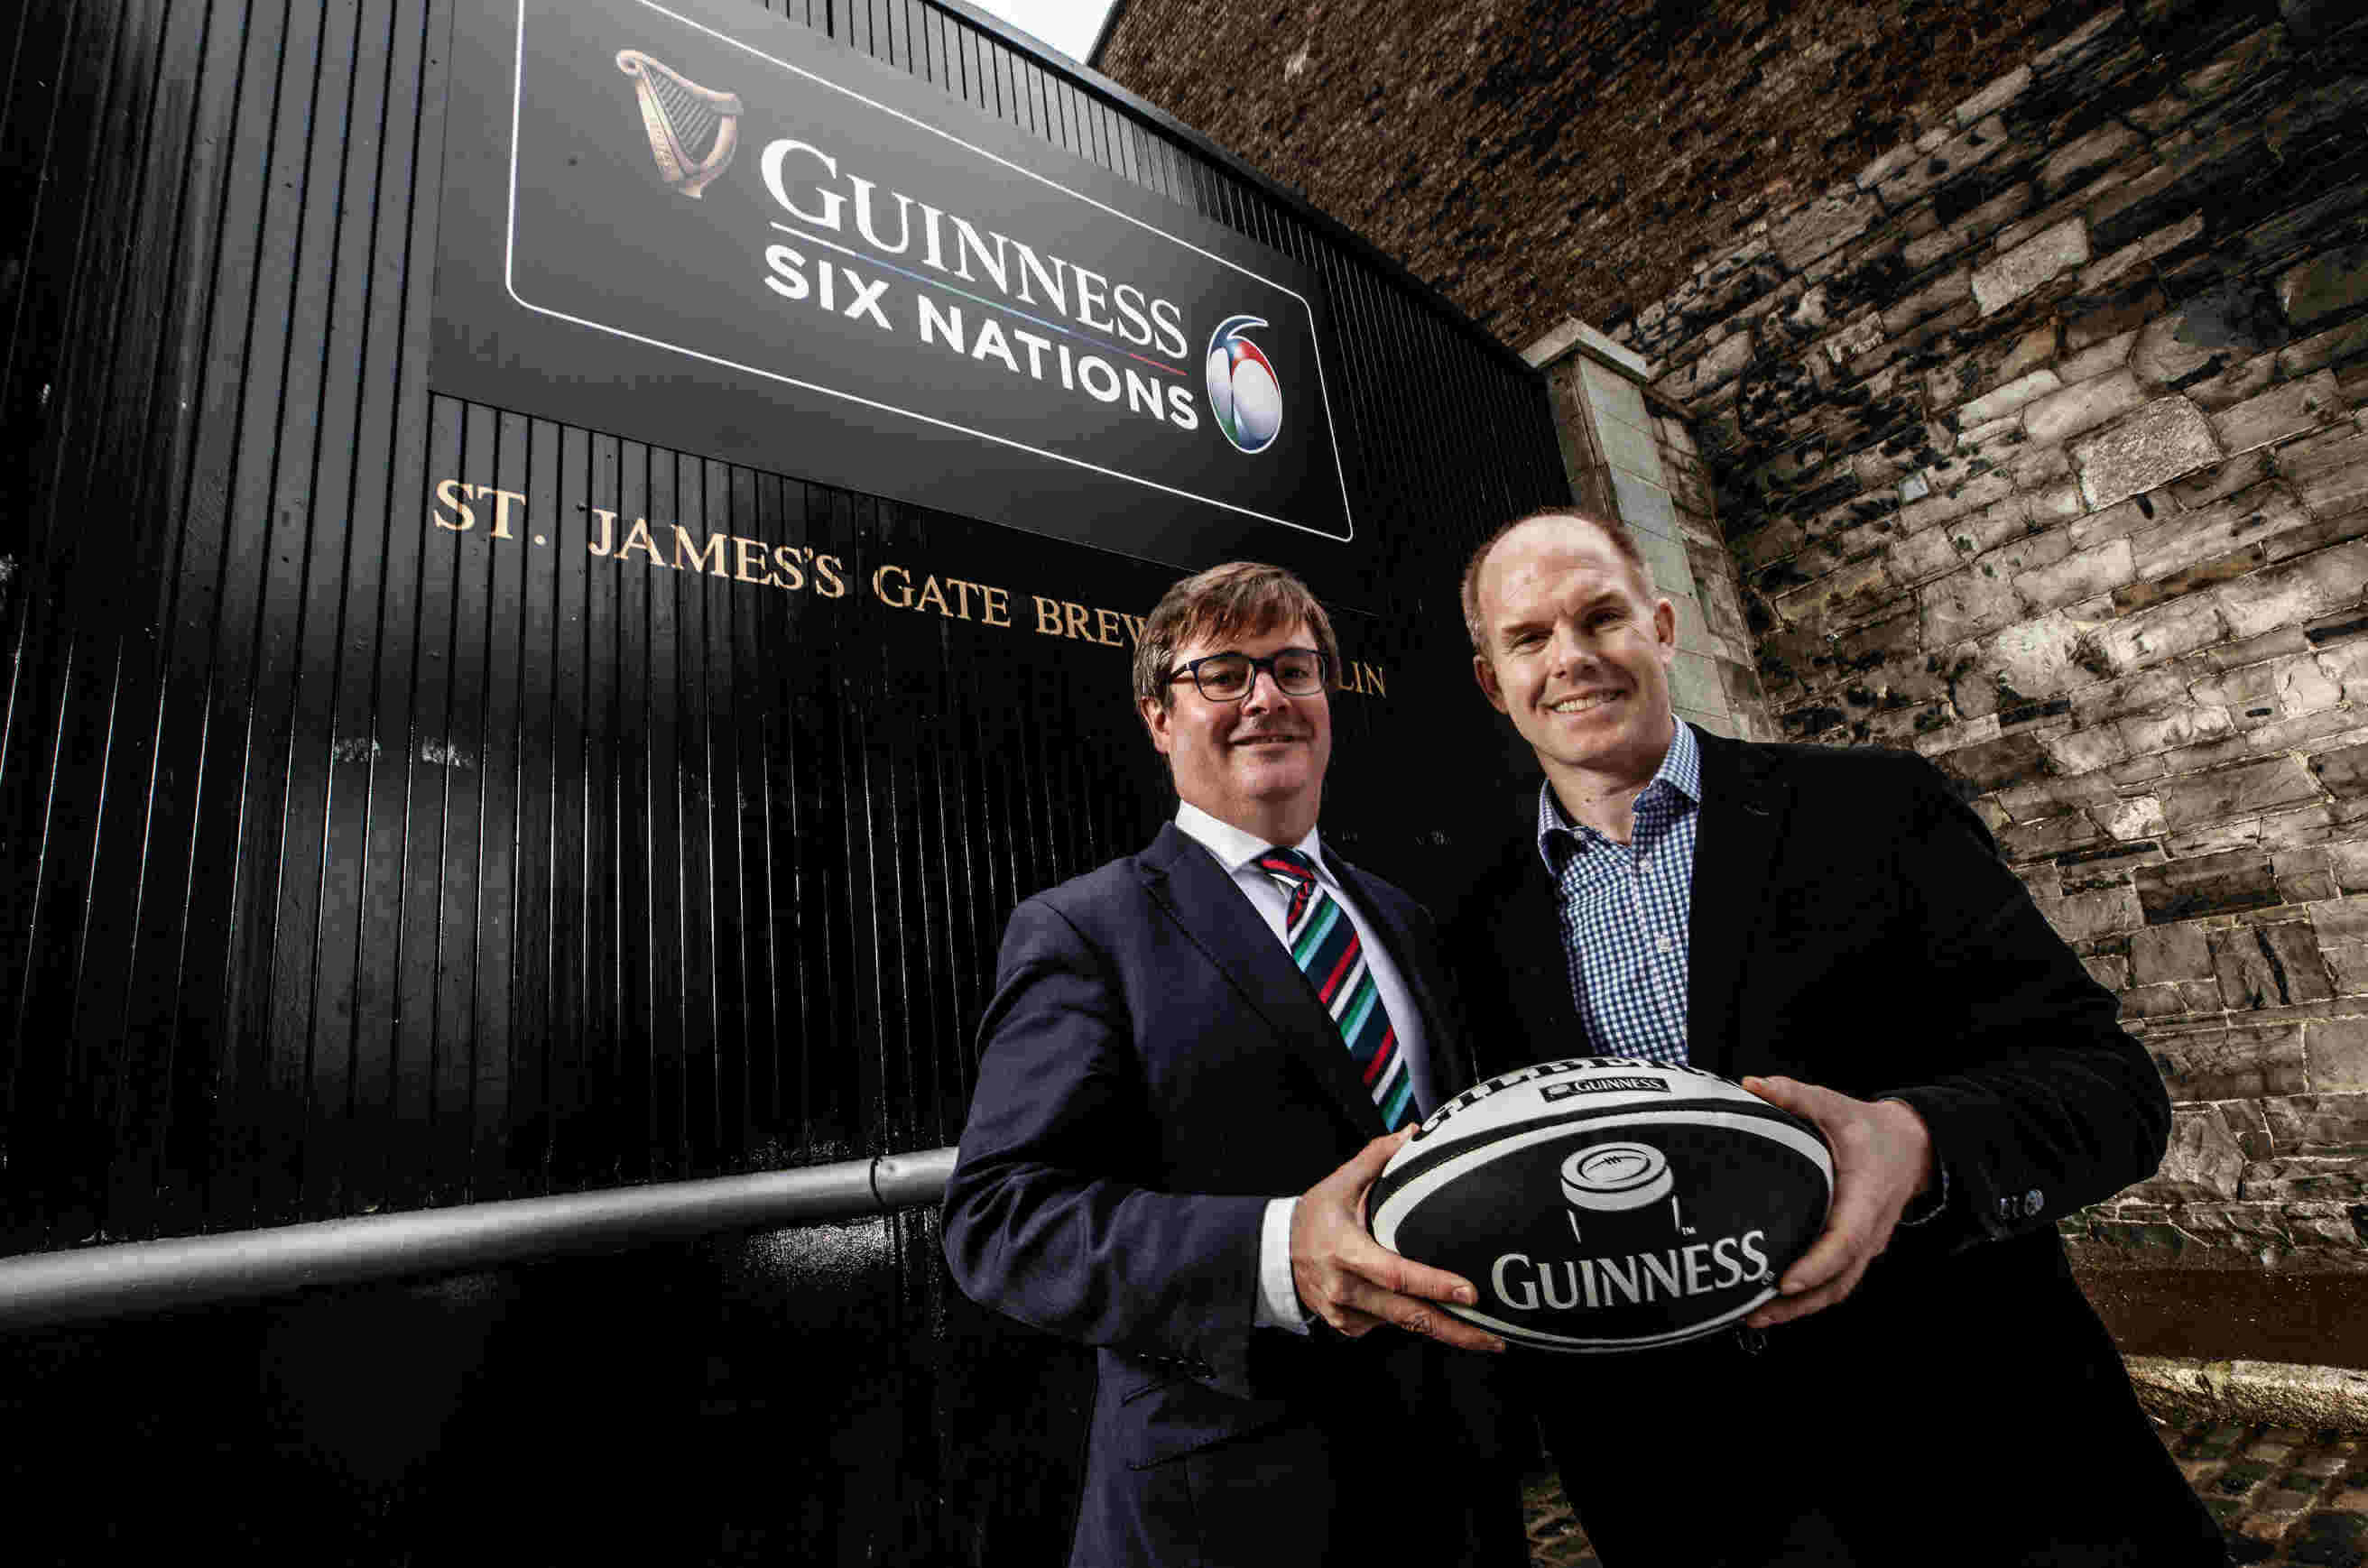 Pint Partnership - From left: Ben Morel, Chief Executive of Six Nations and Mark Sandys, Global Head of Beer & Baileys at Diageo.